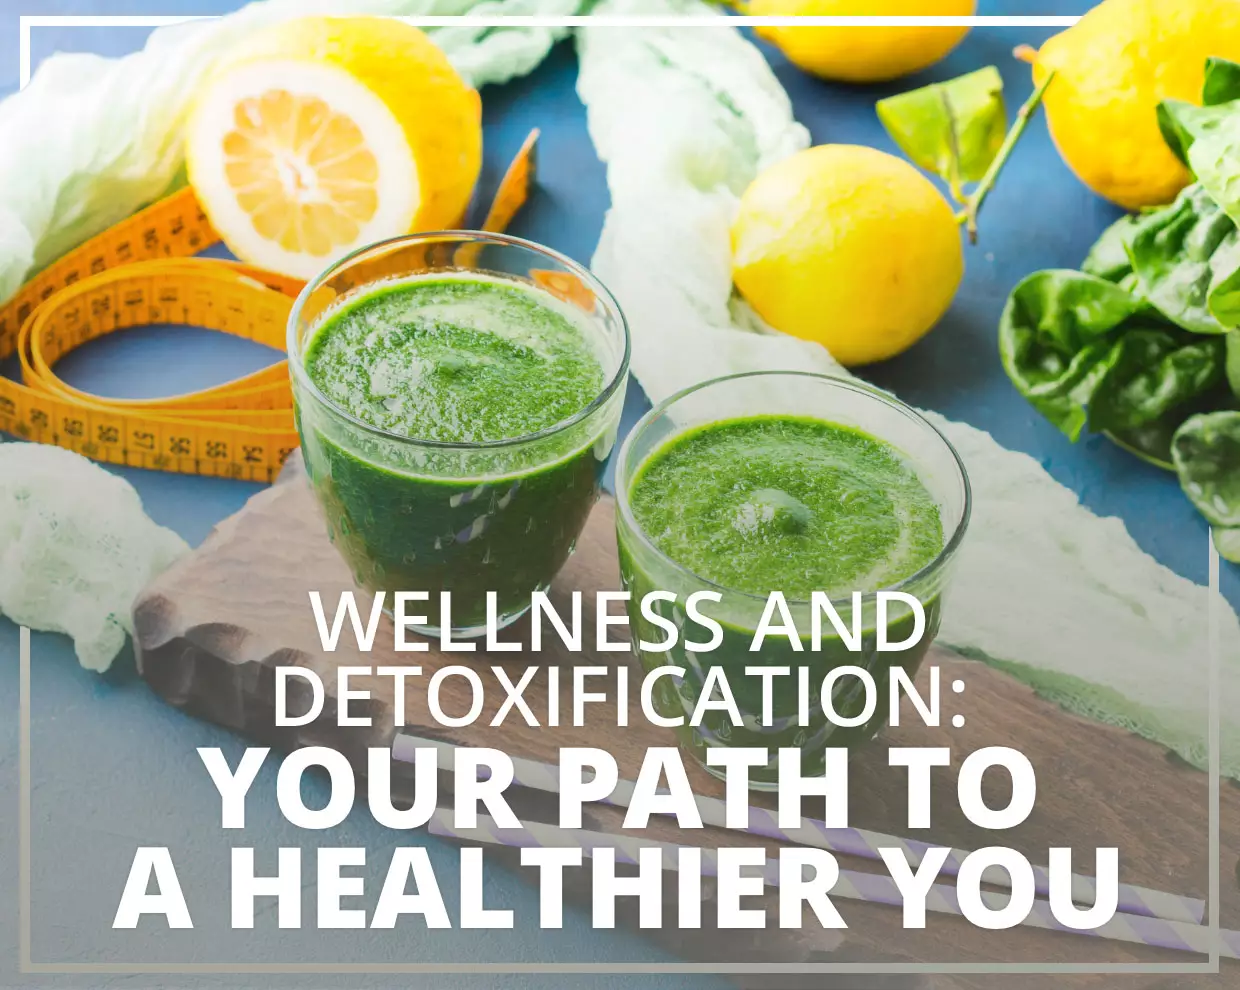 Wellness and Detoxification: Your Path to a Healthier You